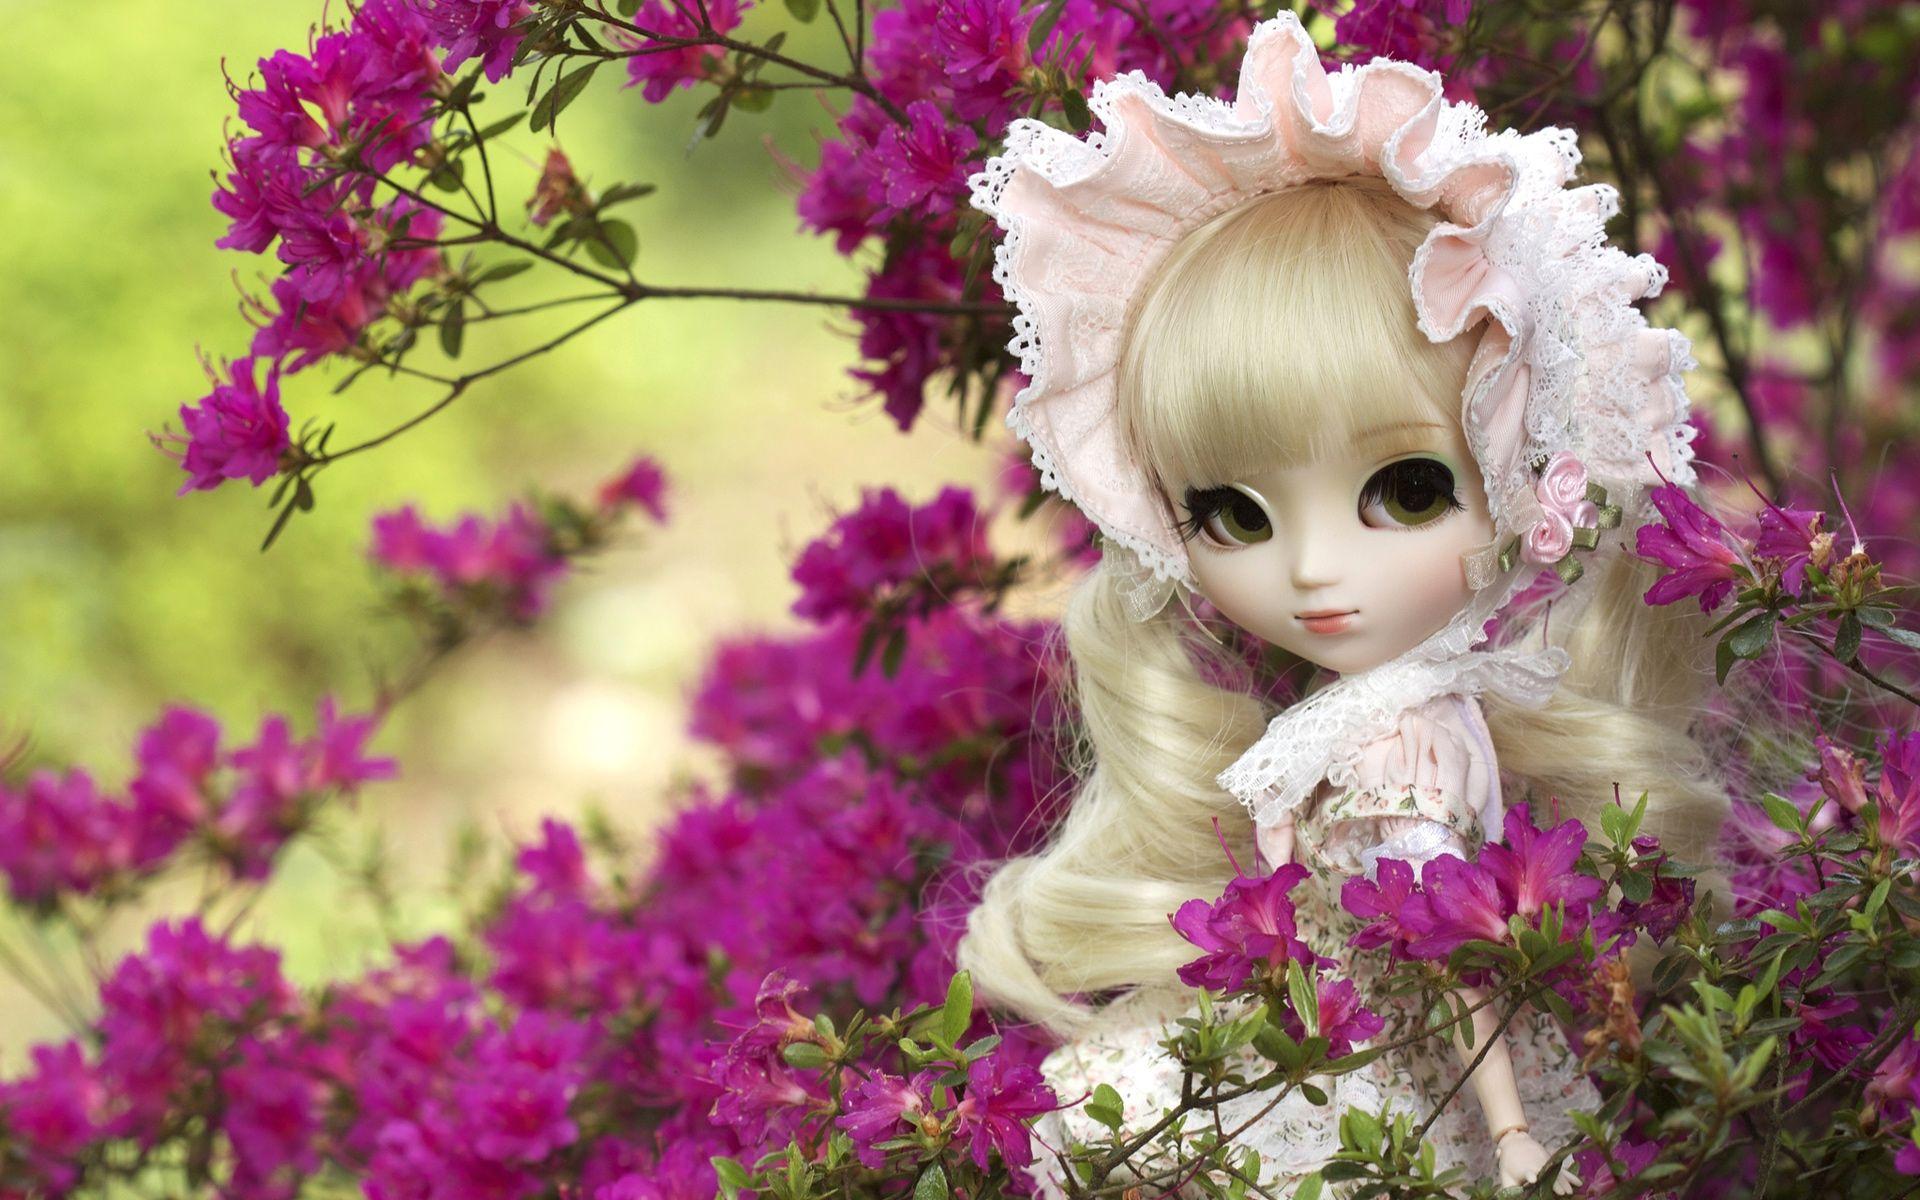 Cute Doll Girl Flowers Wallpaper and Free